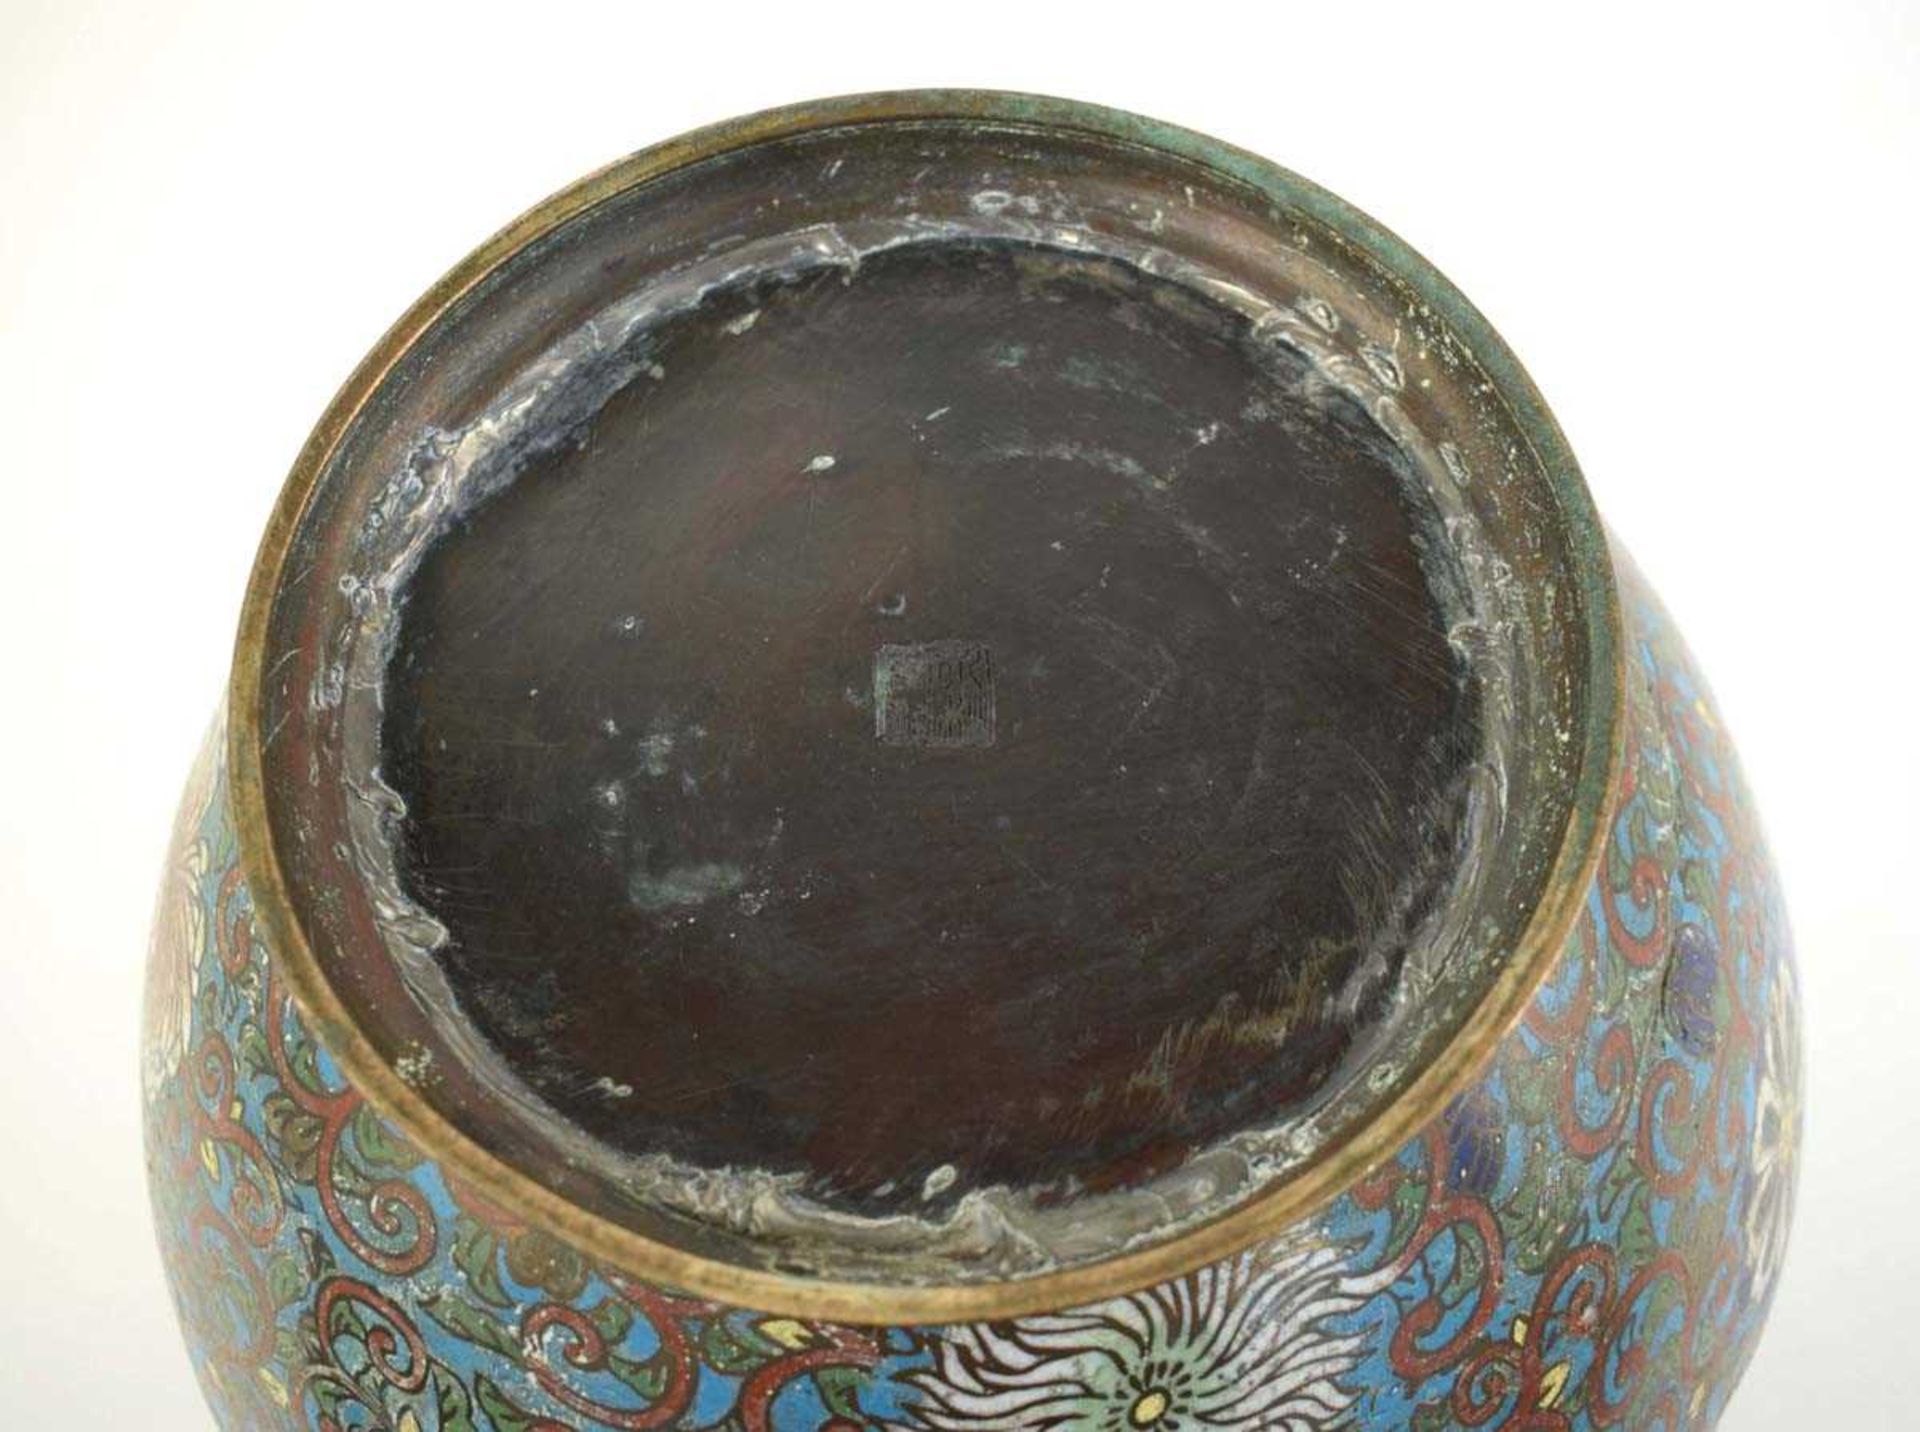 A 19th century Chinese cloisonné enamel jardinière of squat baluster form decorated with - Image 5 of 6